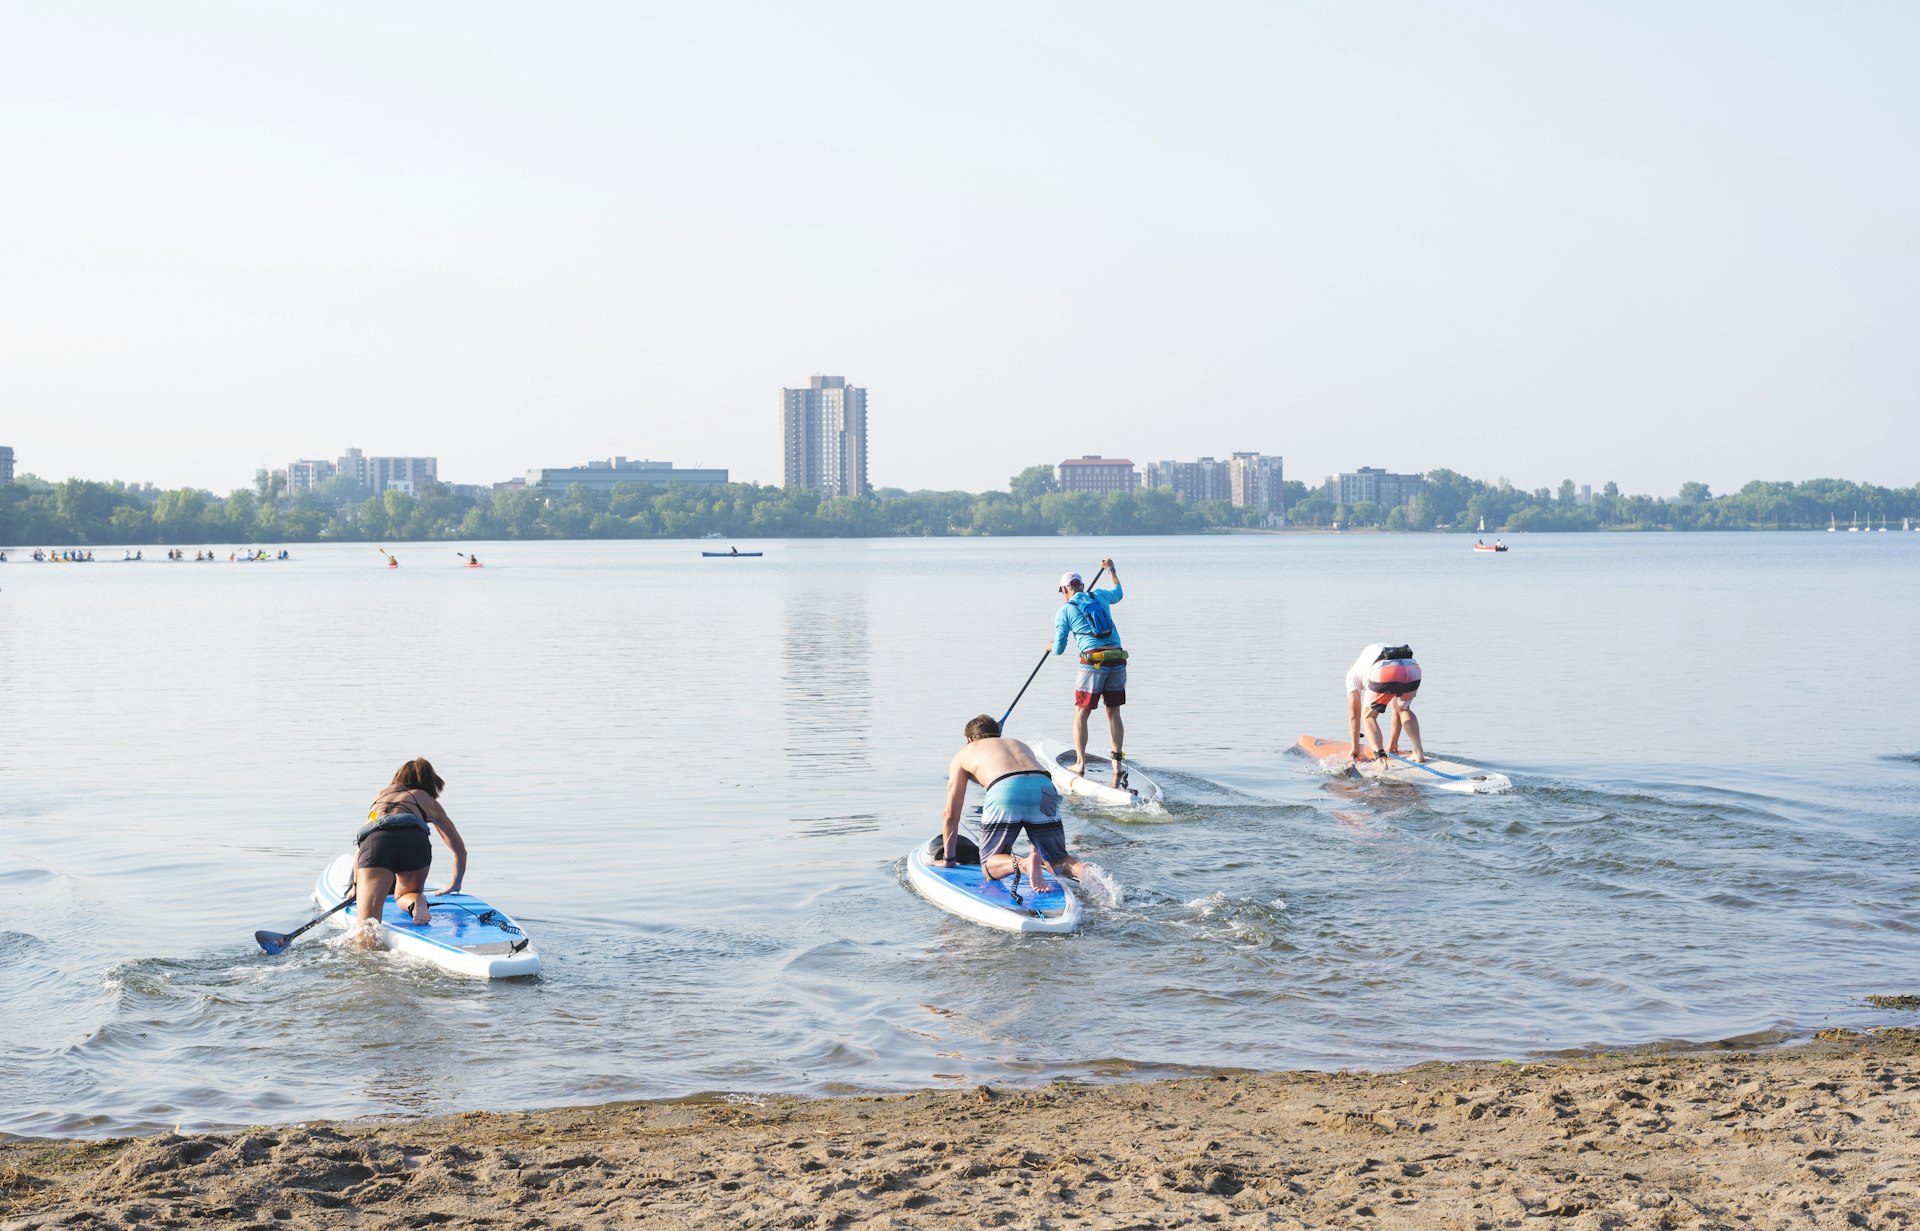 Four paddleboarders leave the sandy beach and head out onto Bde Maka Ska lake in Minneapolis, Minnesota